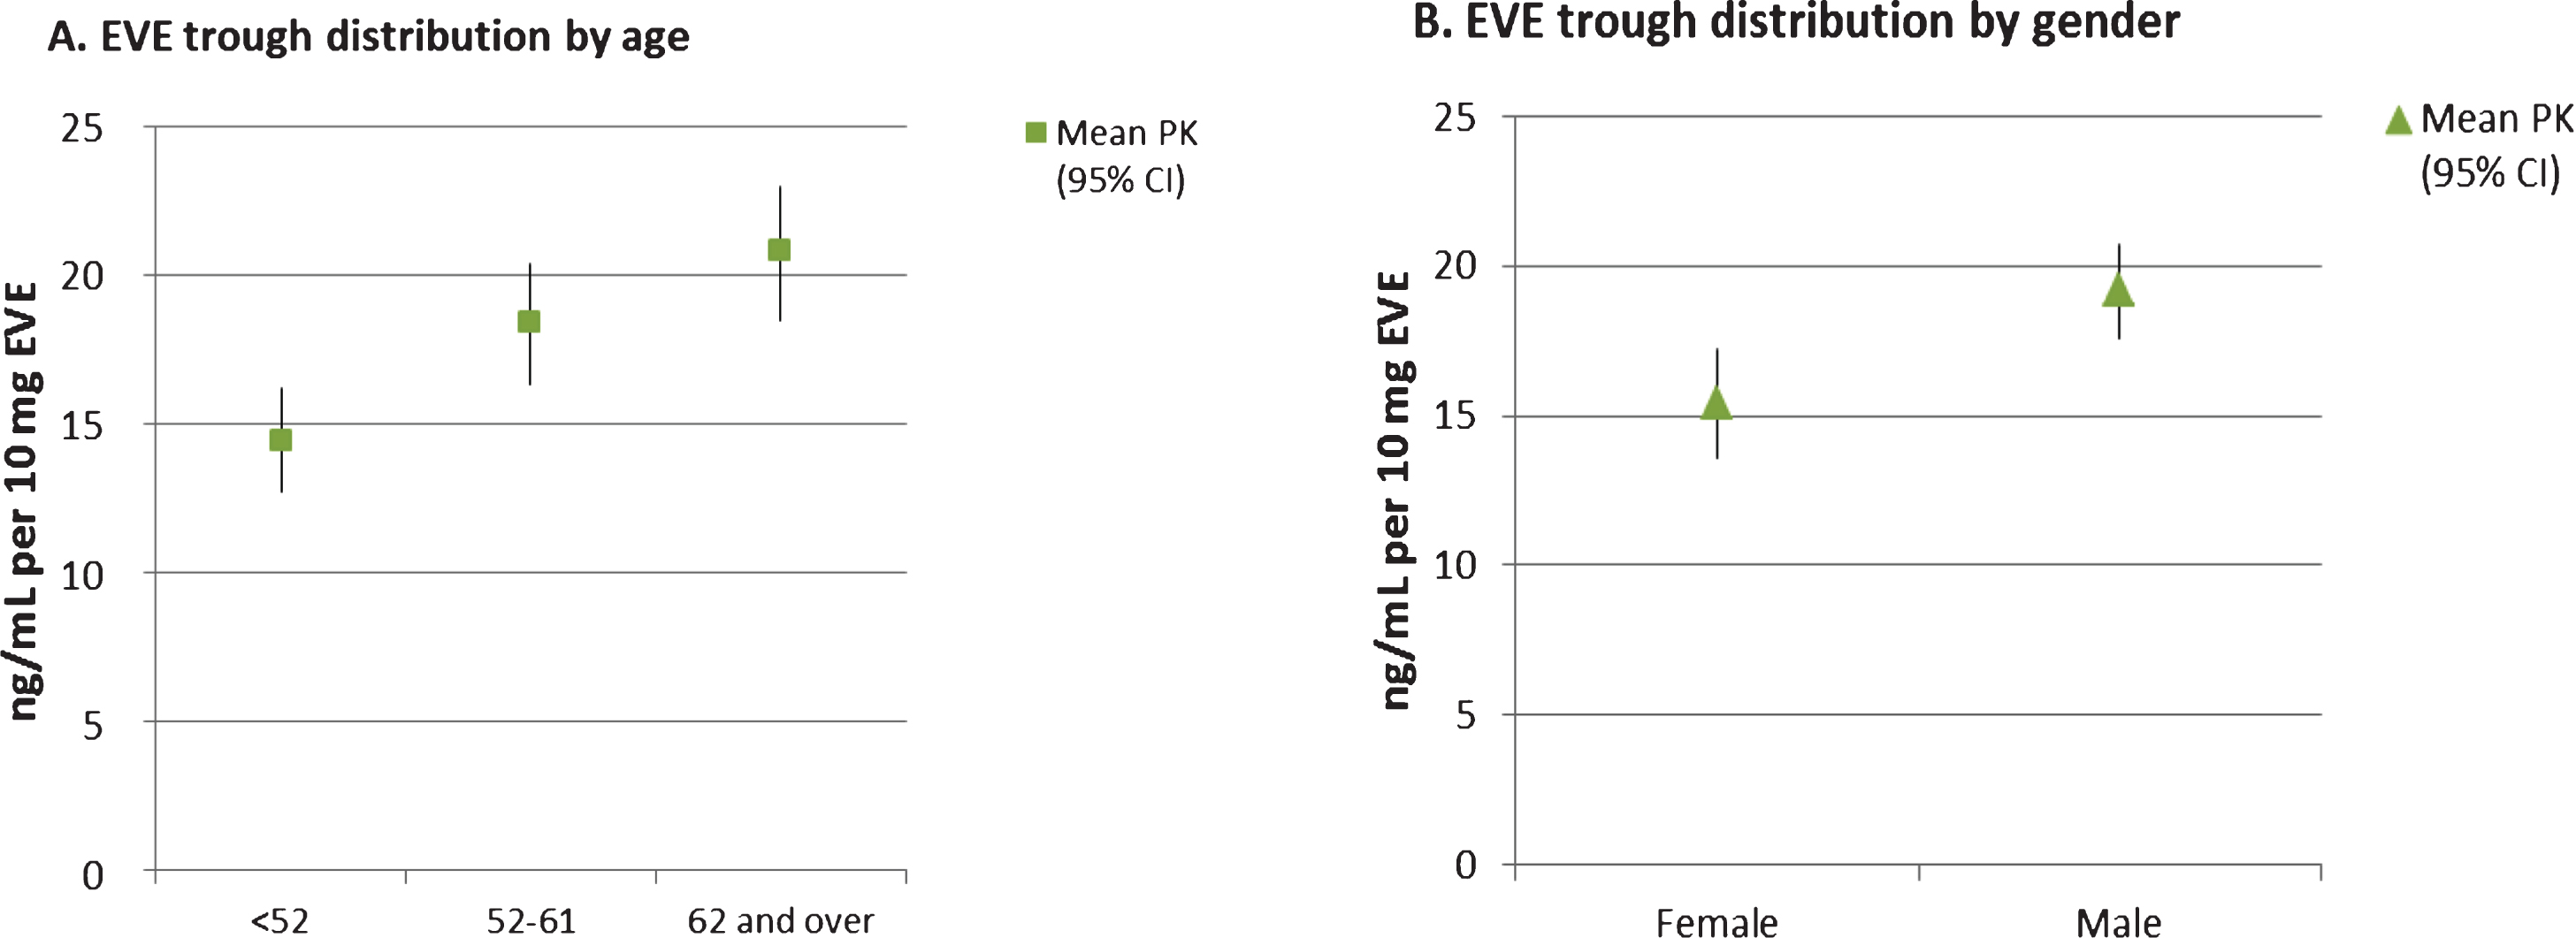 Mean EVE trough versus age (panel A) and gender (panel B). Symbols are the mean EVE trough values normalized to a dose of 10 mg/day. Bars indicate the 95% confidence intervals.